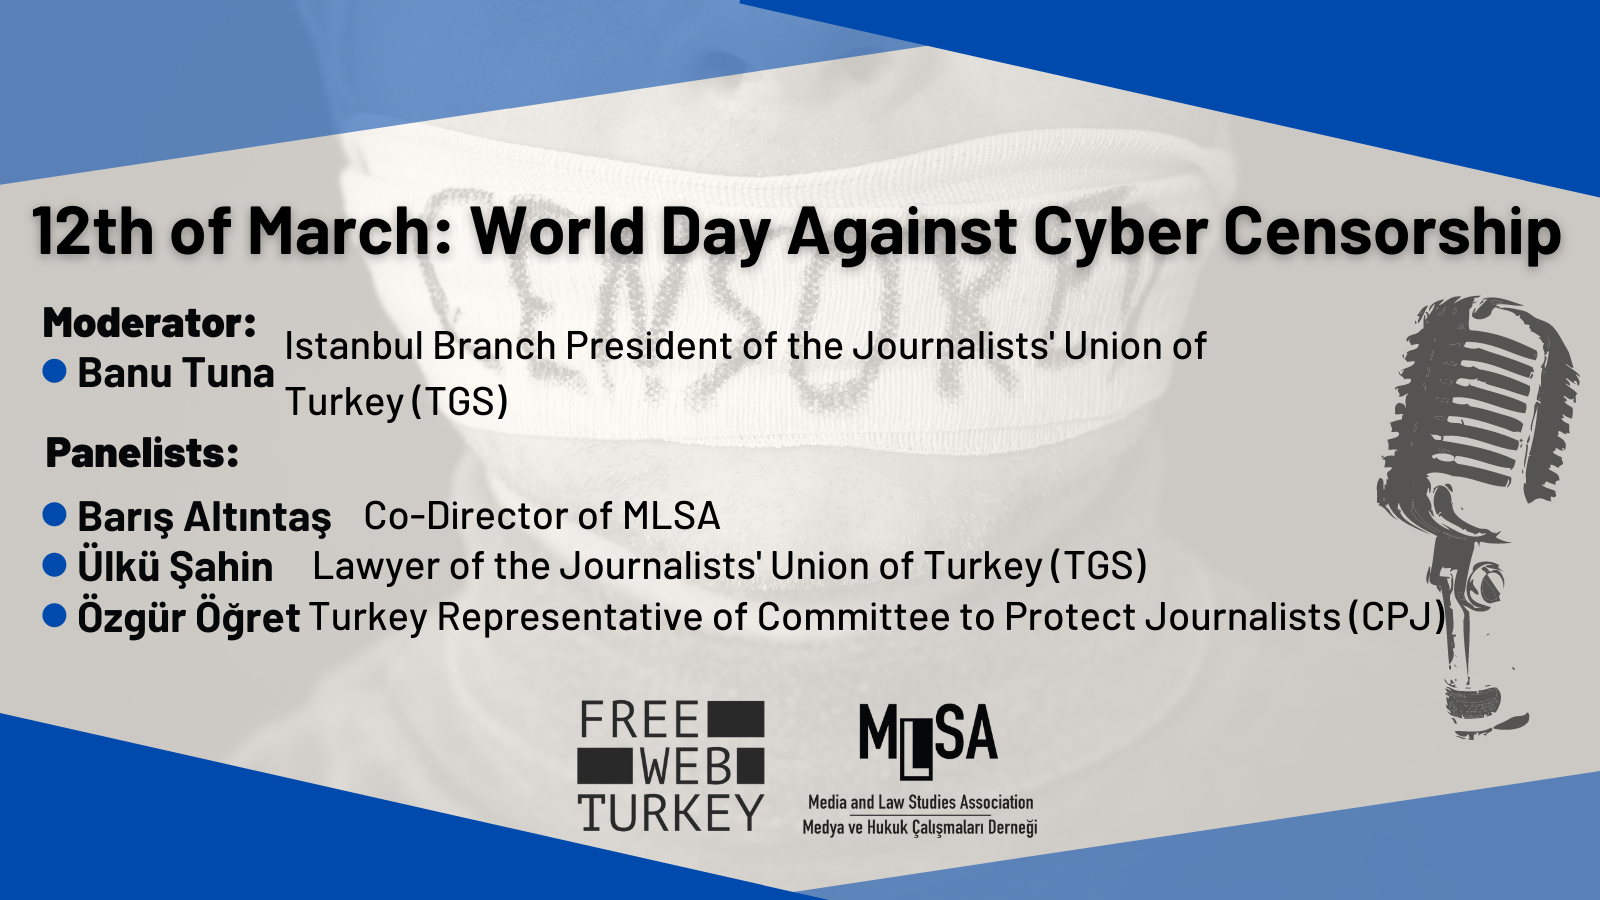 Increasing censorship regulations in the world and in Turkey make journalists' work harder